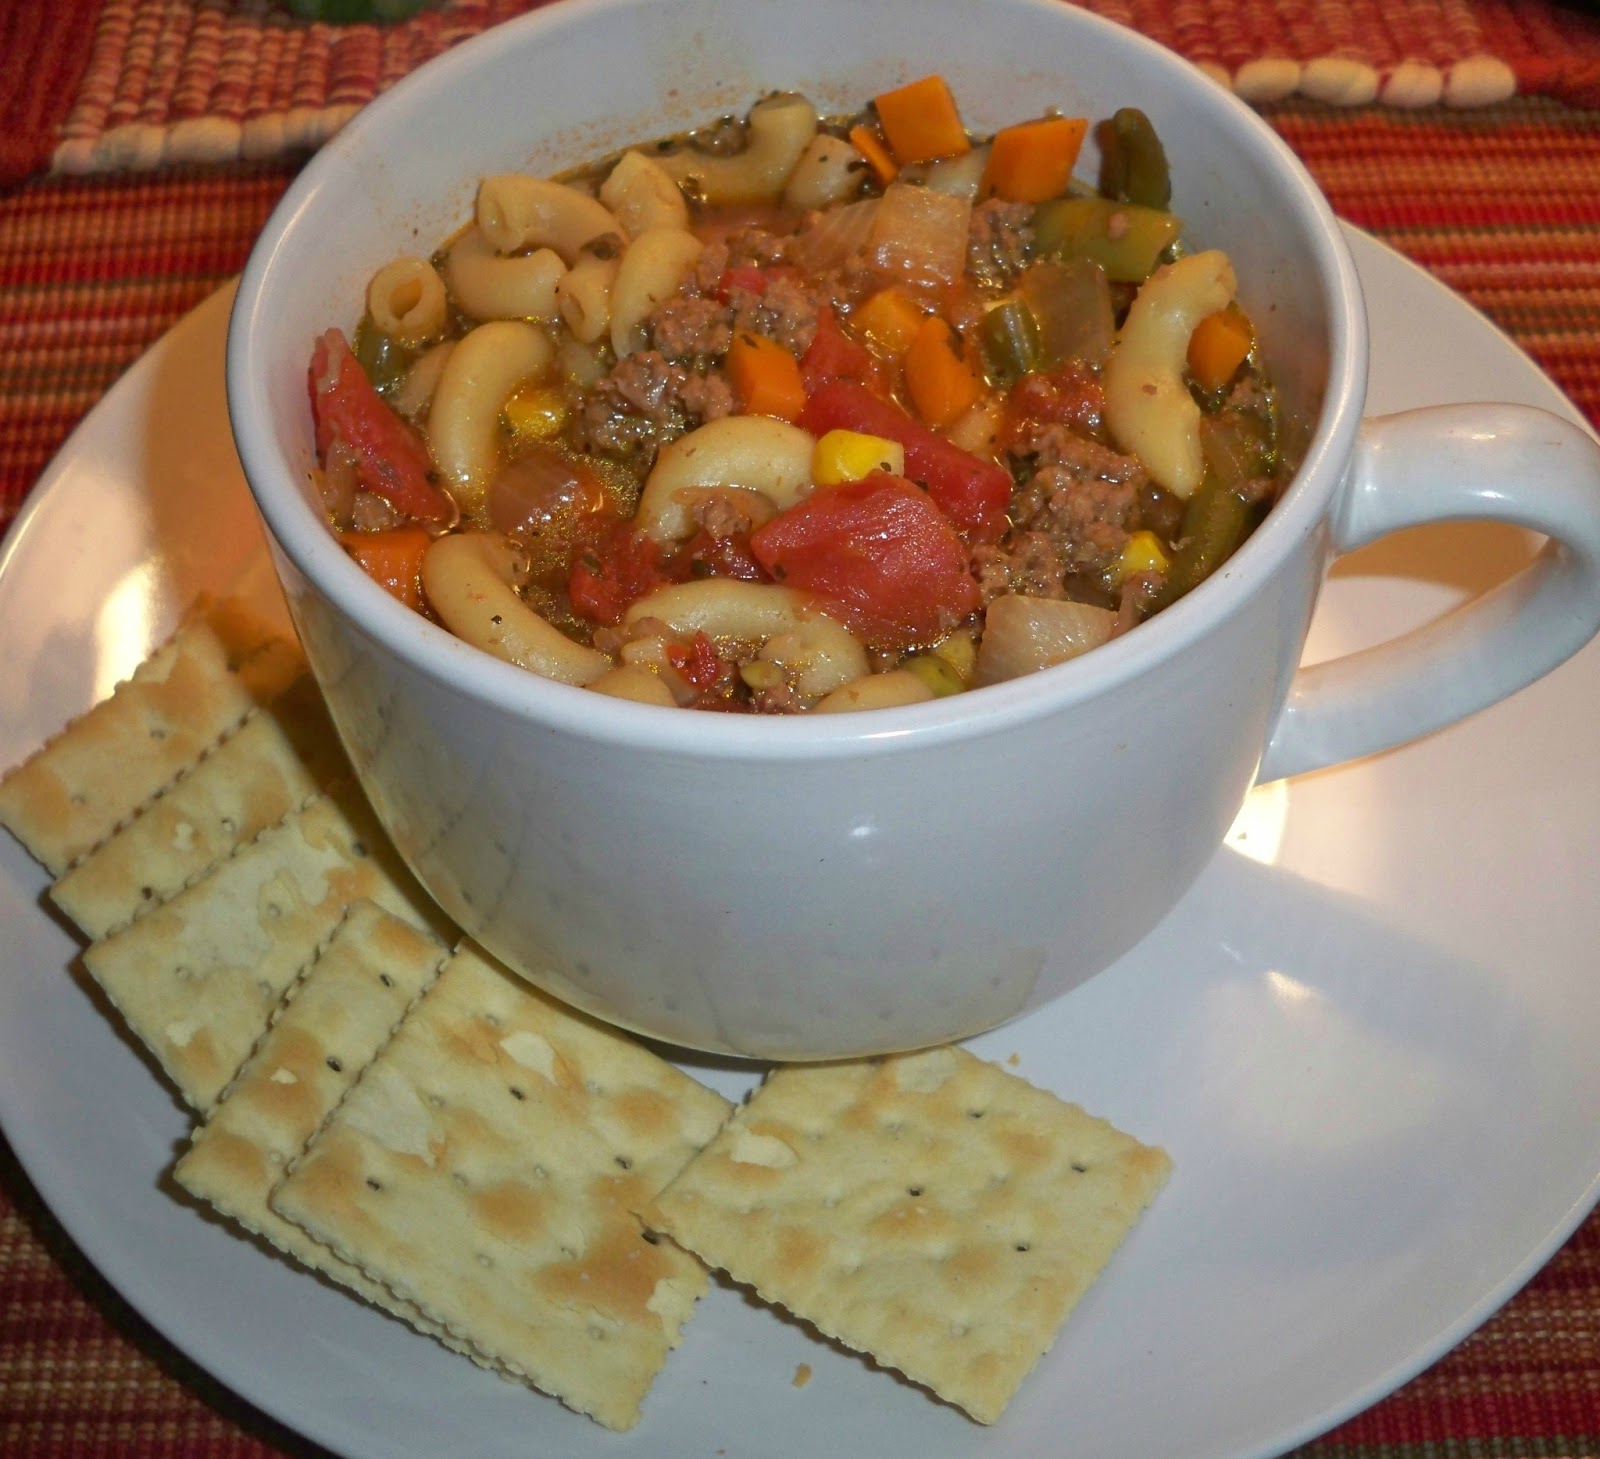 Gramma's in the kitchen: Zesty Vegetable Soup